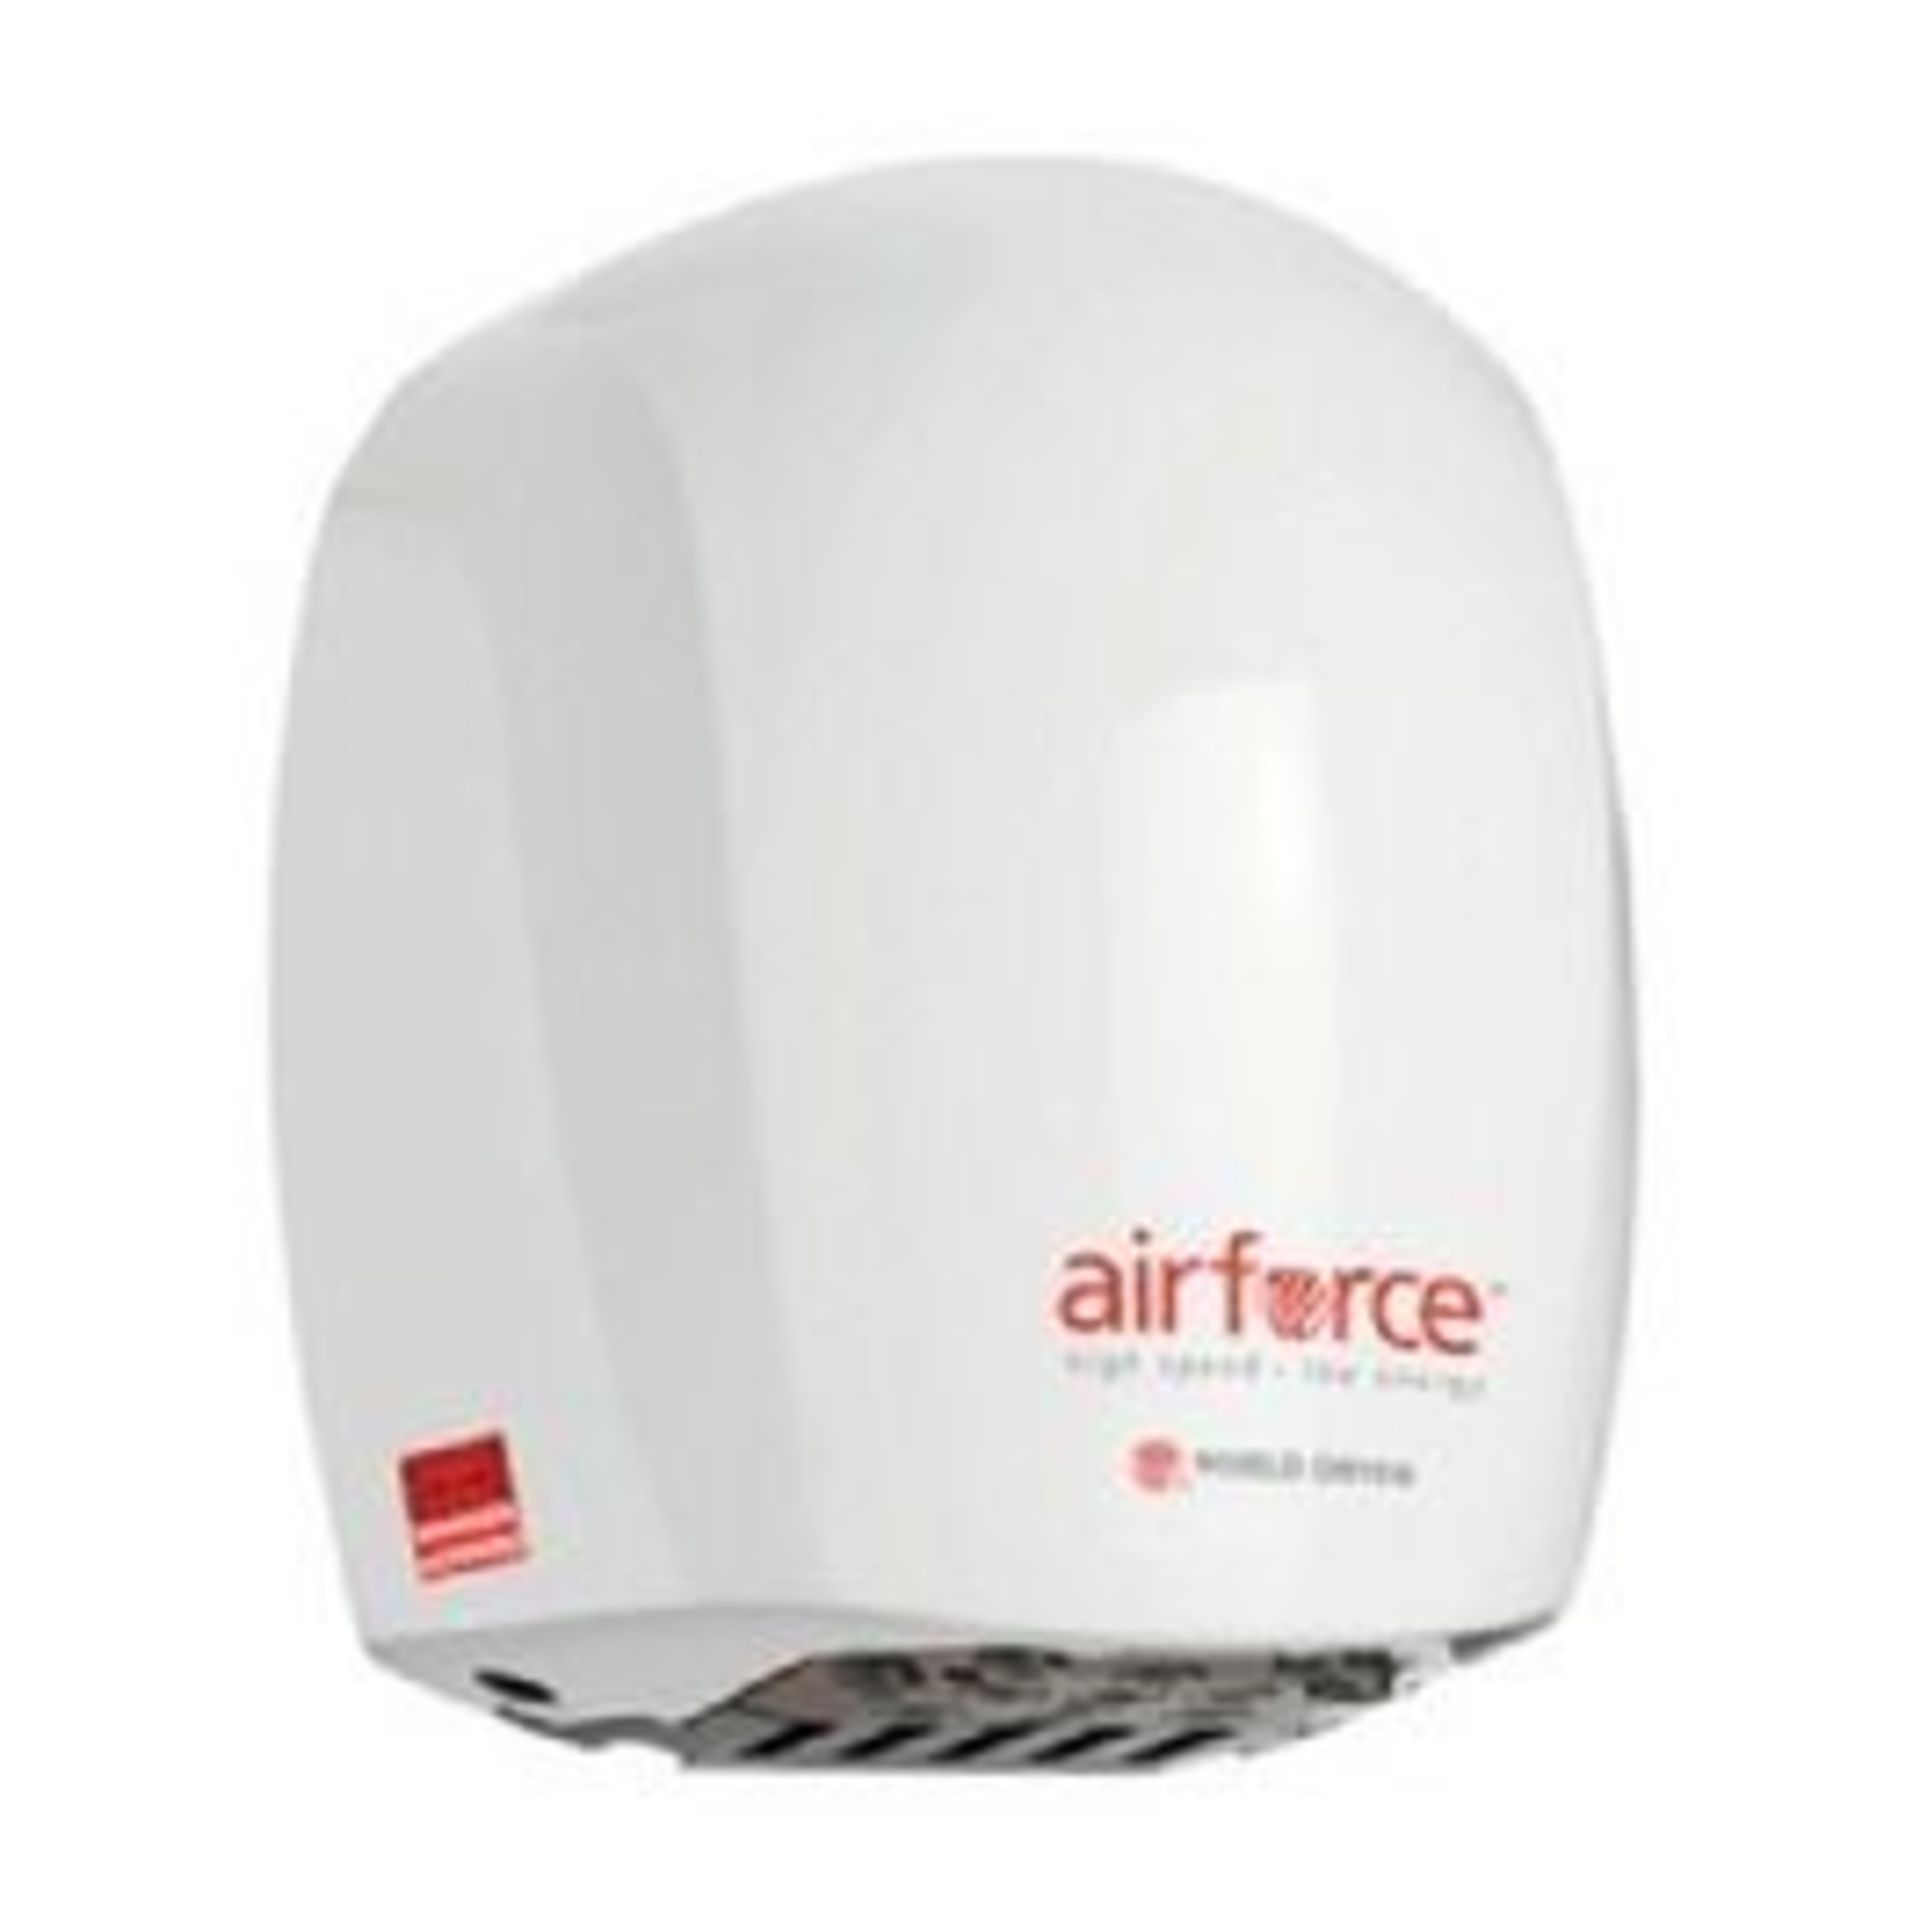 1 x Air Force High Speed Low Energy Electric Hand Dryer - Mode J48-974W3 - Brand New and Boxed -